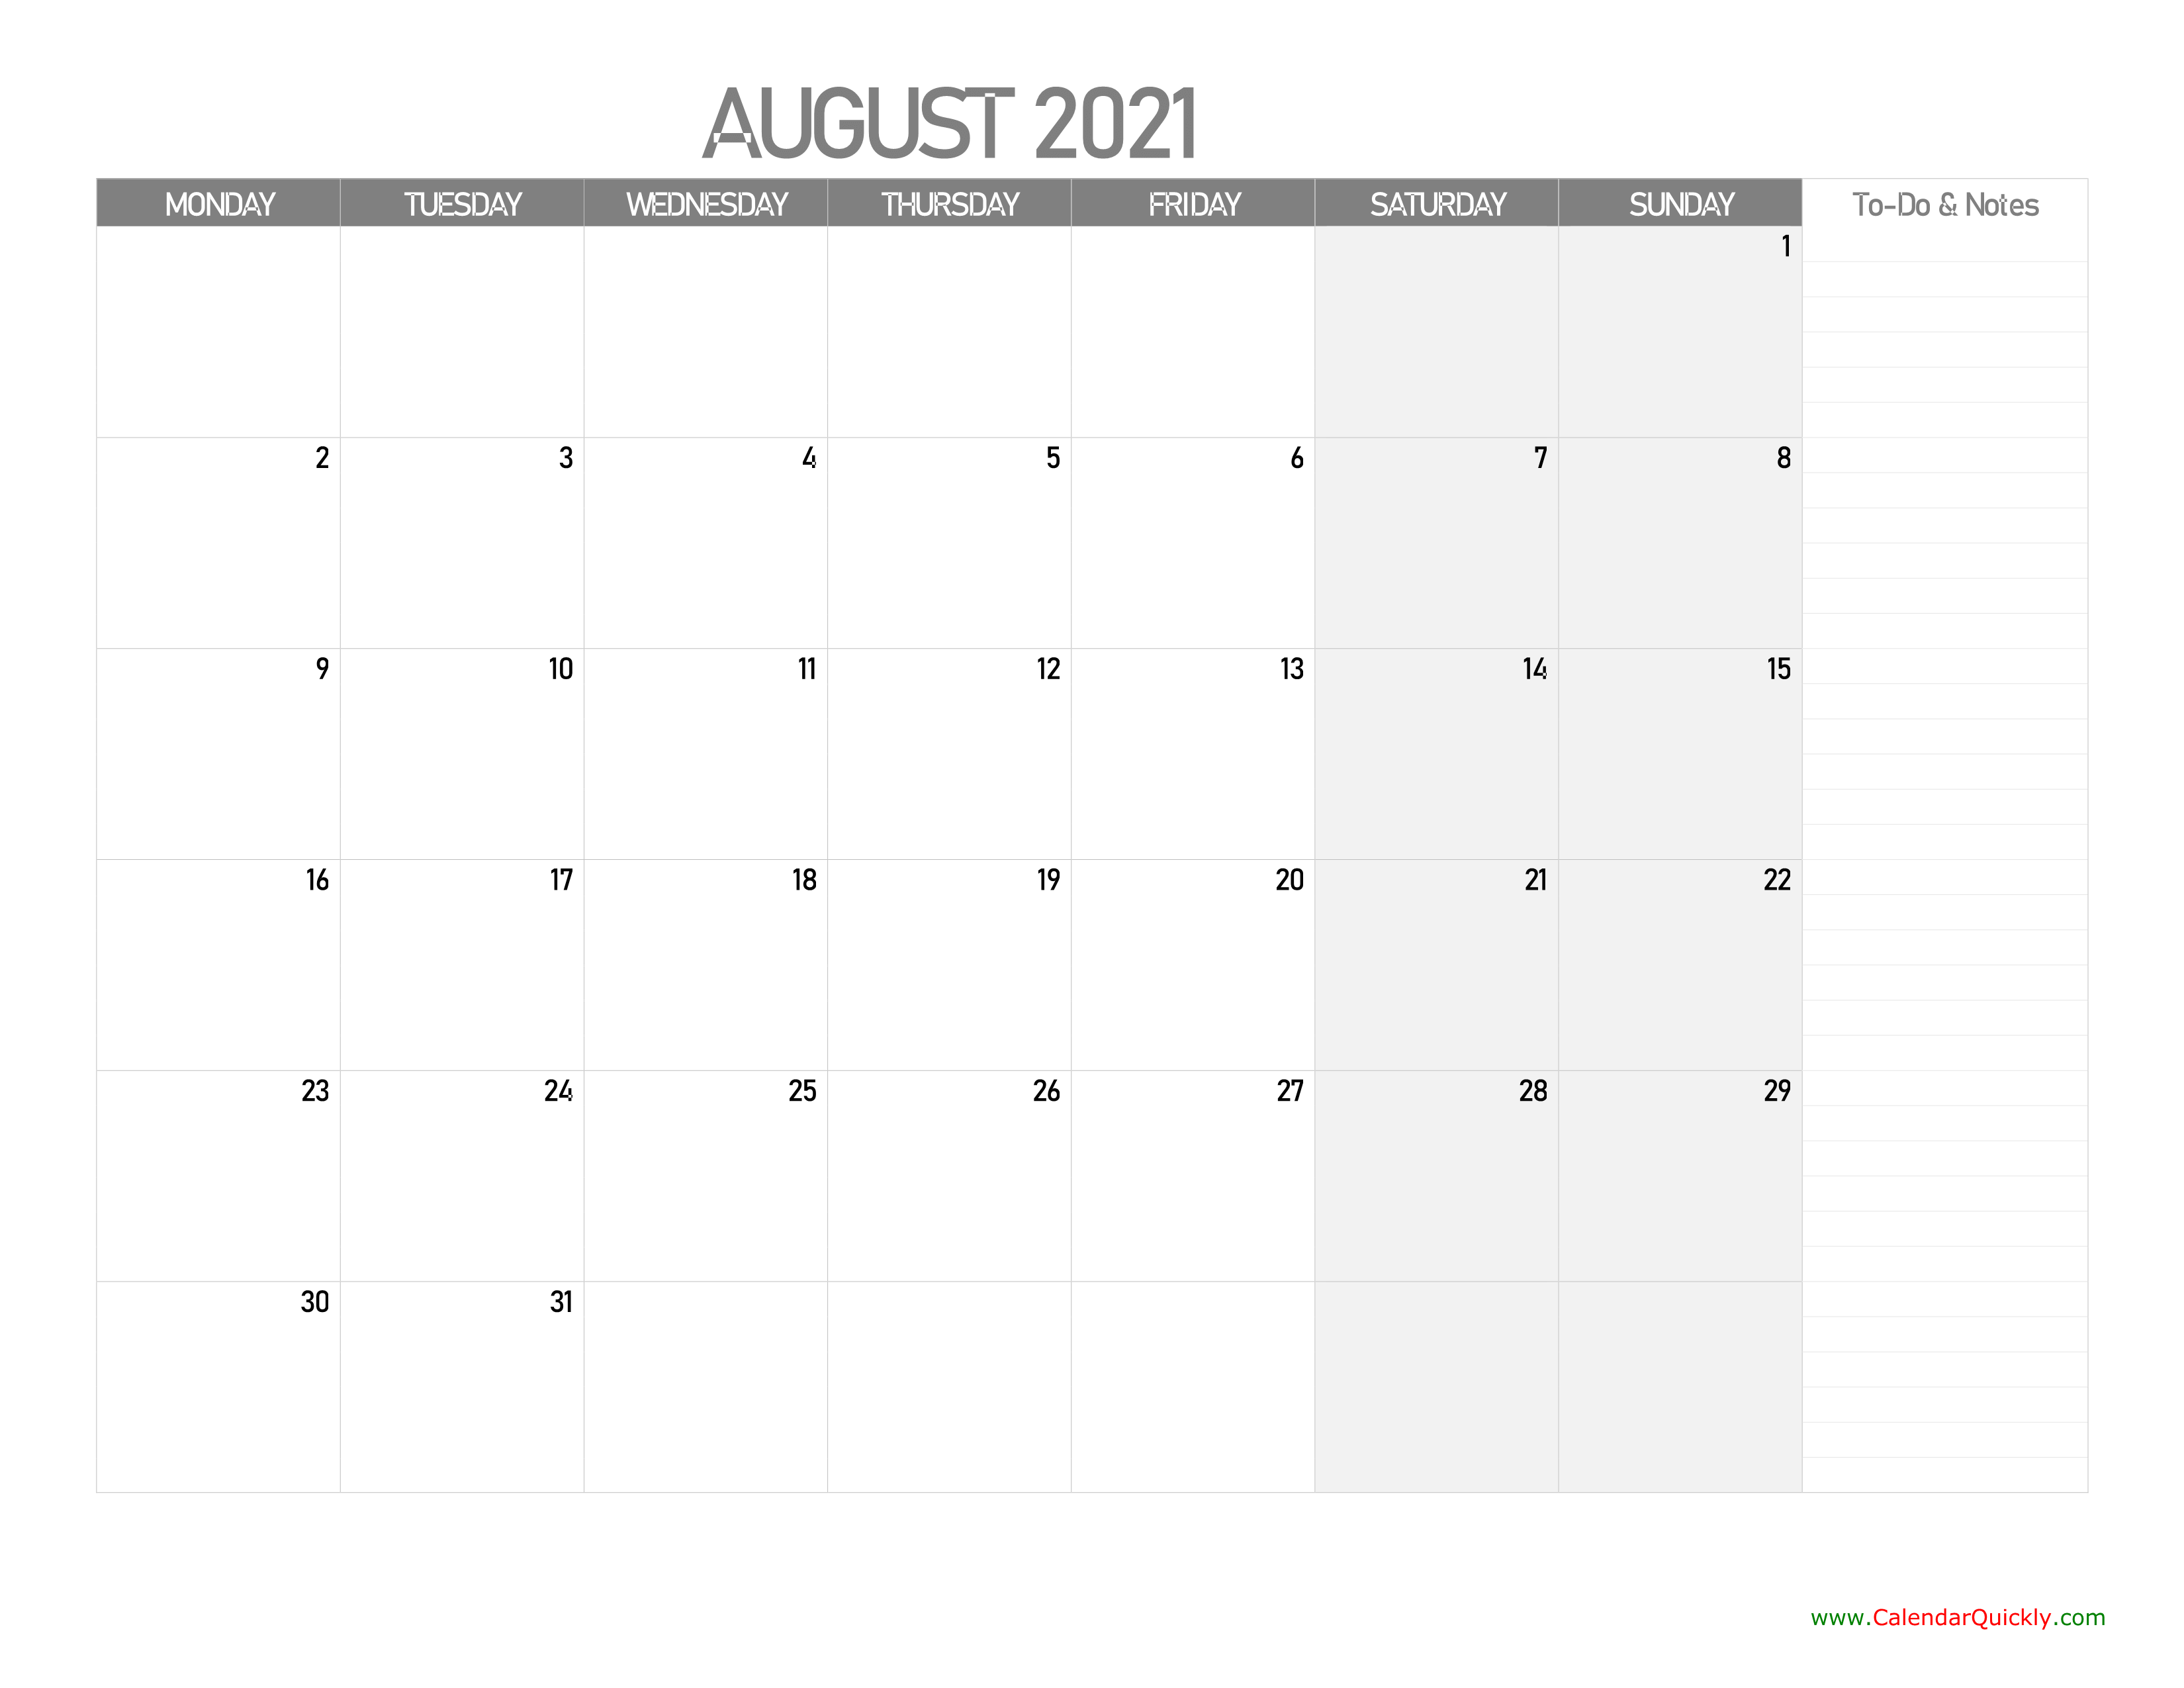 August Monday Calendar 2021 with Notes Calendar Quickly